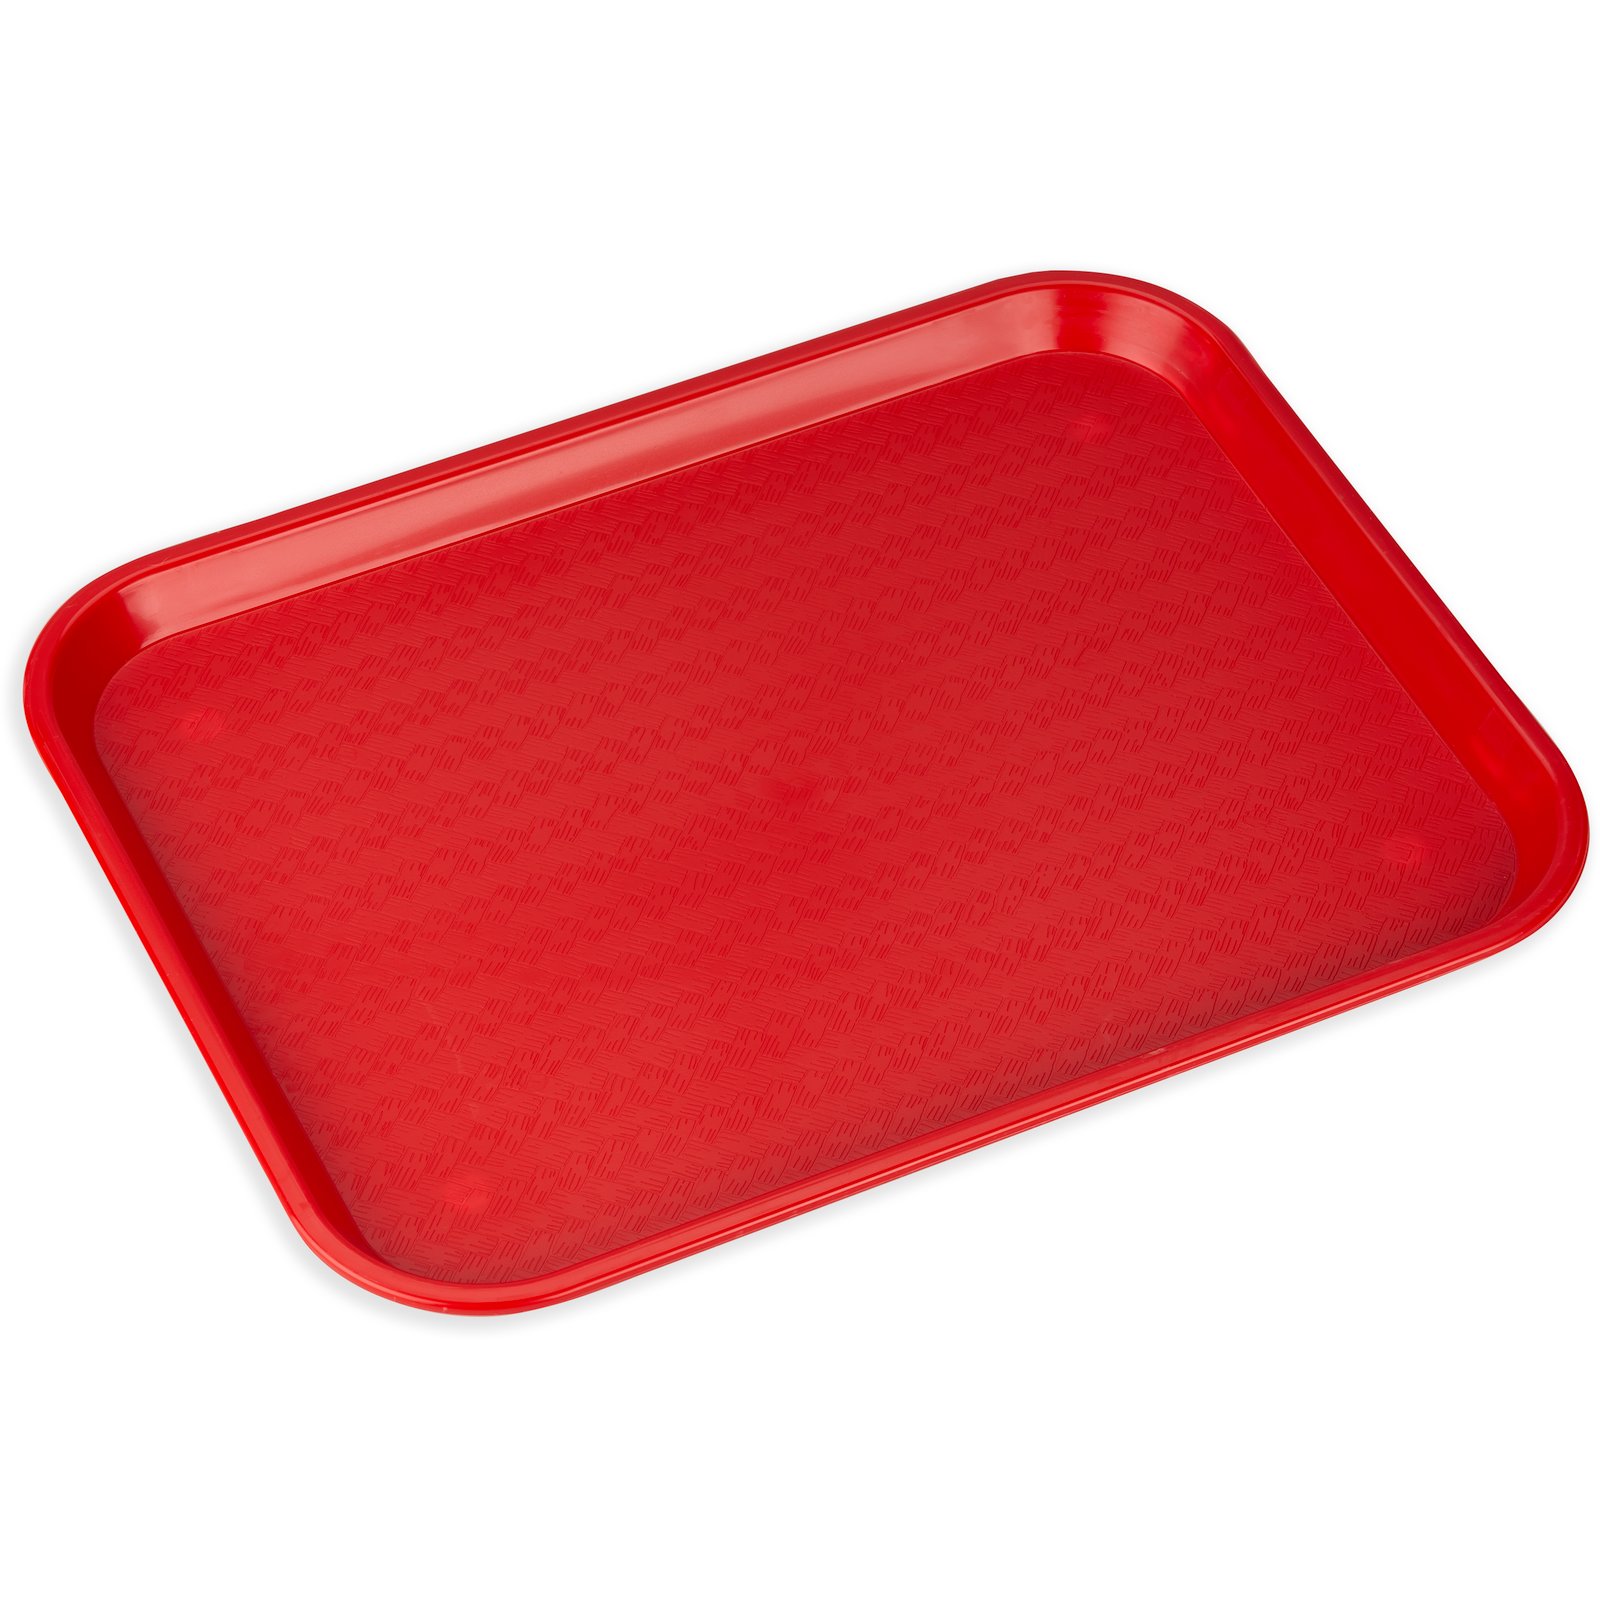 CT141805 - Cafe® Fast Food Cafeteria Tray 14 x 18 - Red